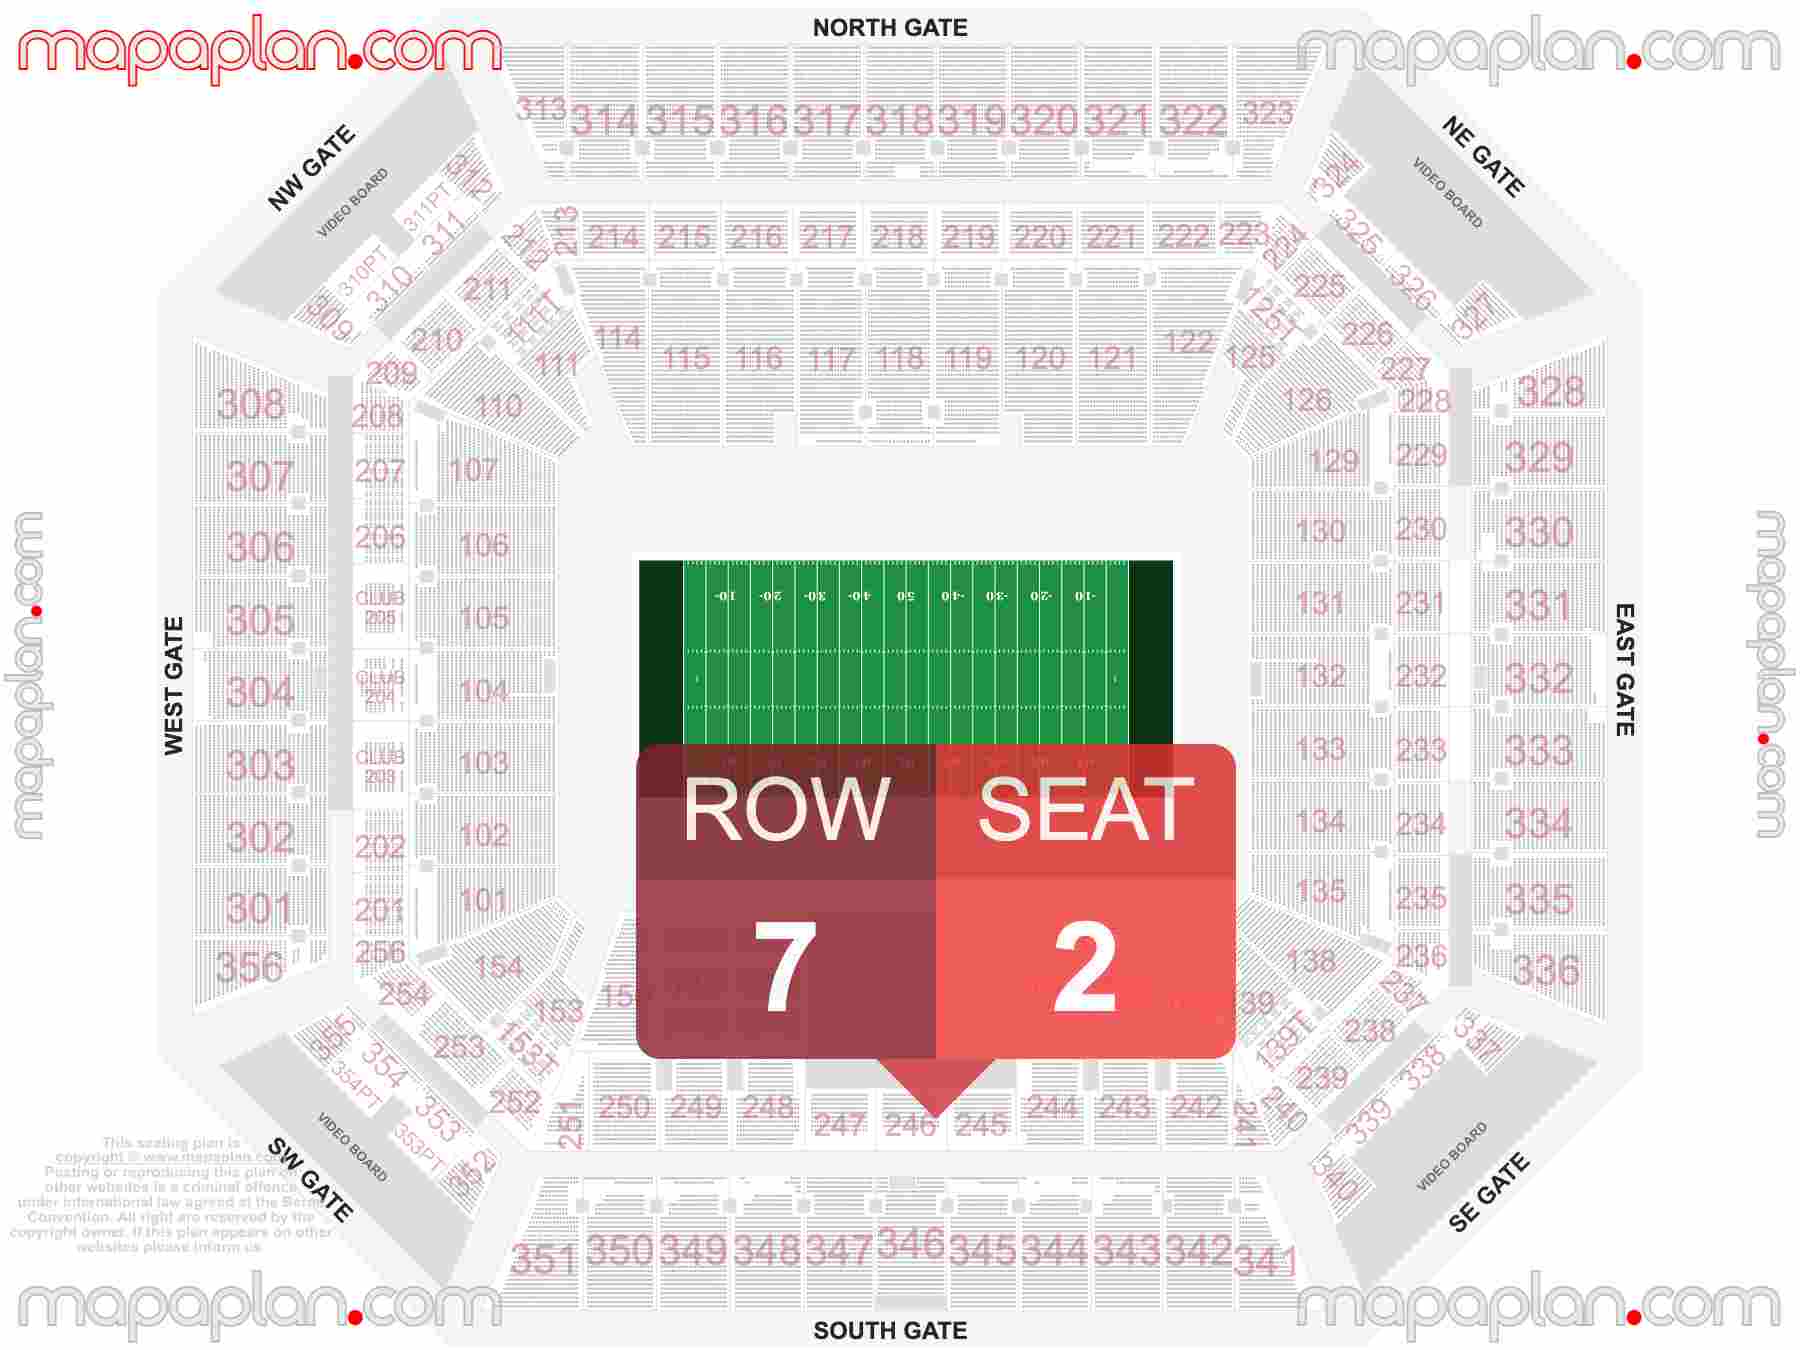 Miami Hard Rock Stadium seating chart Dolphins & Hurricanes football inside capacity view arrangement plan - Interactive virtual 3d best seats & rows detailed stadium image configuration layout